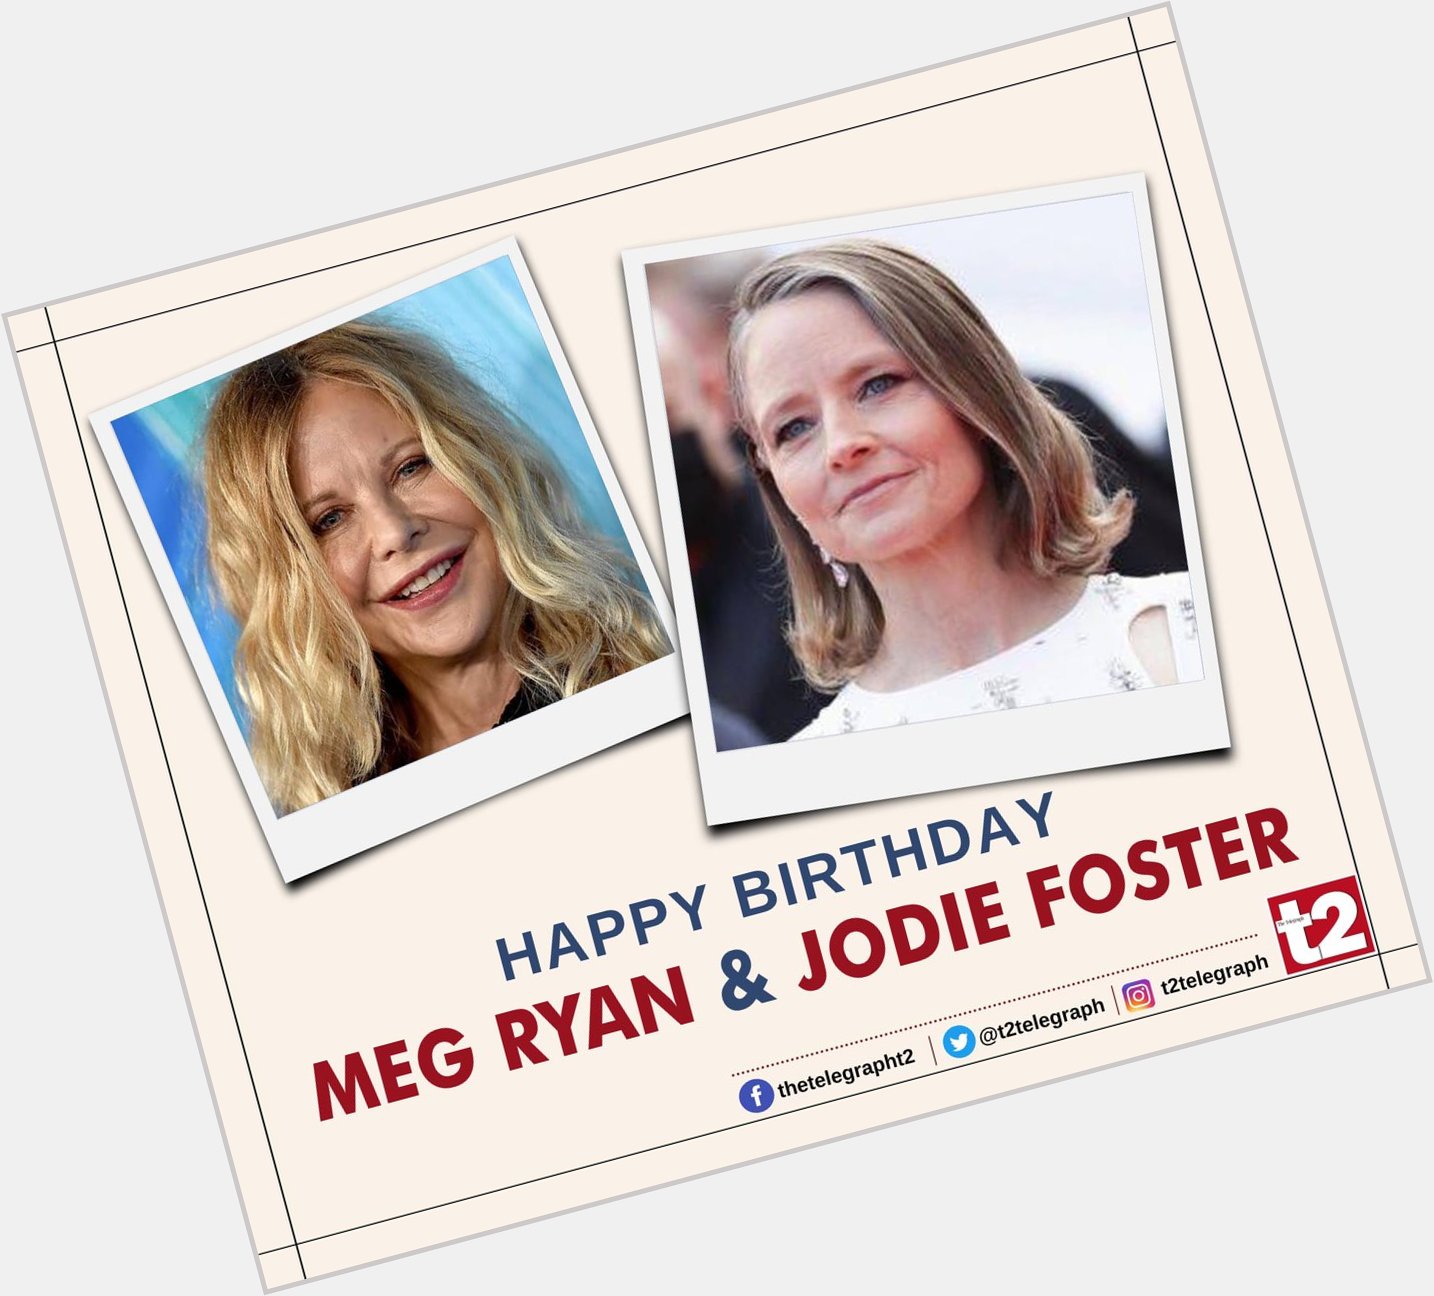 They have spun magic on the Holly screen. Here\s wishing Meg Ryan and Jodie Foster a very happy birthday 